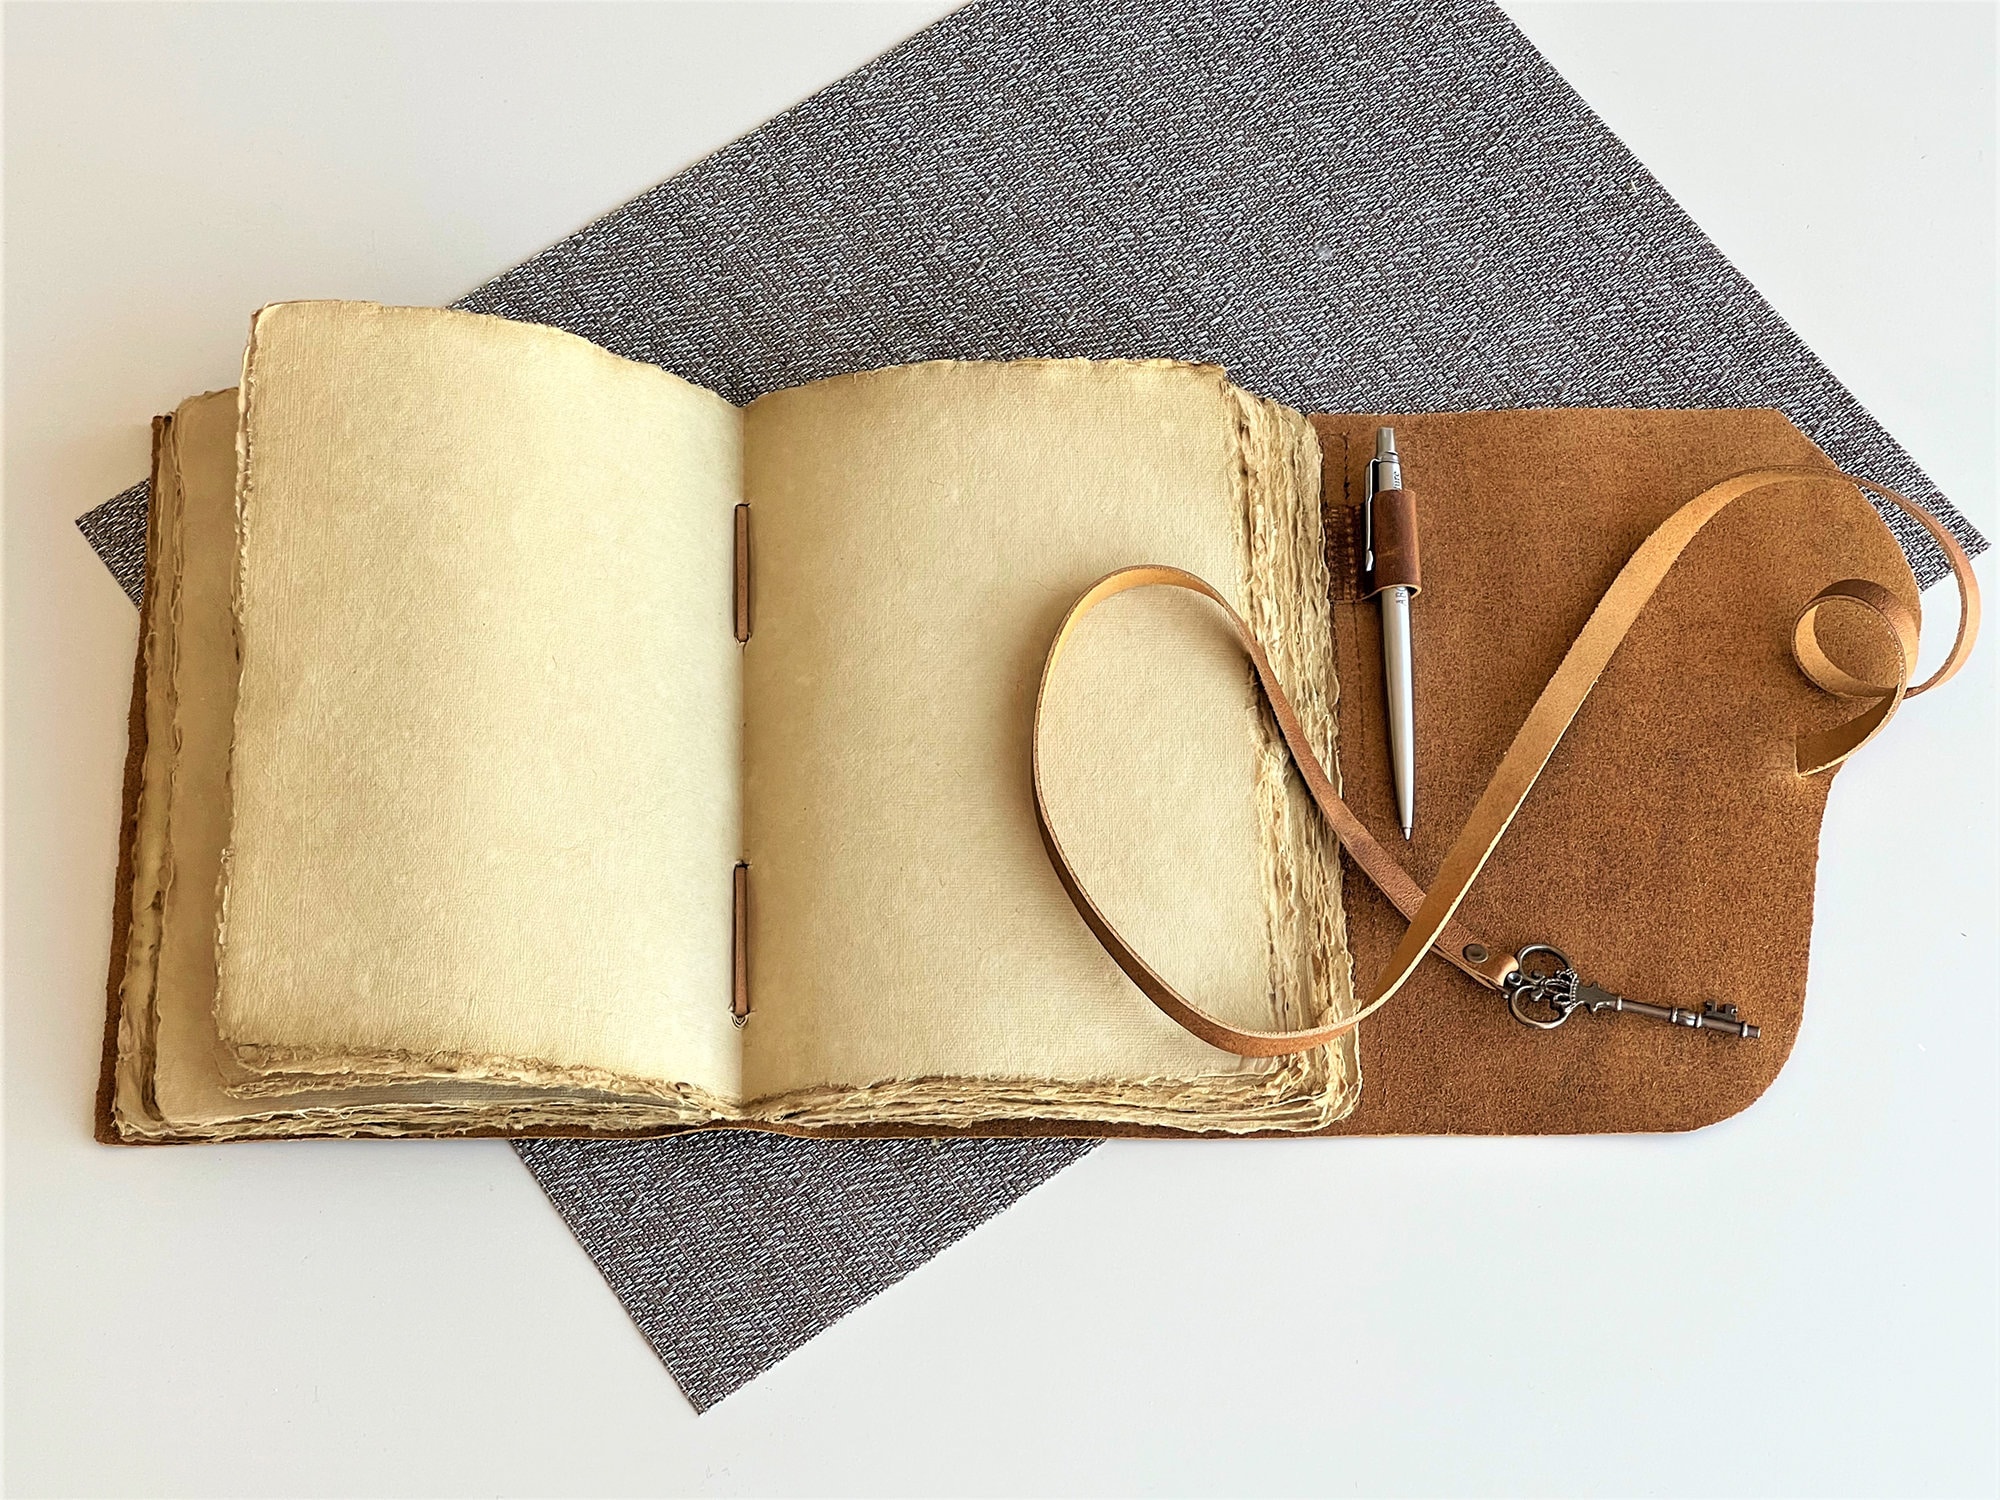 Leather Journal with lined Deckle Edge Paper 9x6 inch and Vintage Key/  Handmade Writing Notebook Diary/ Bound Daily Notepad for Men & Women  Medium